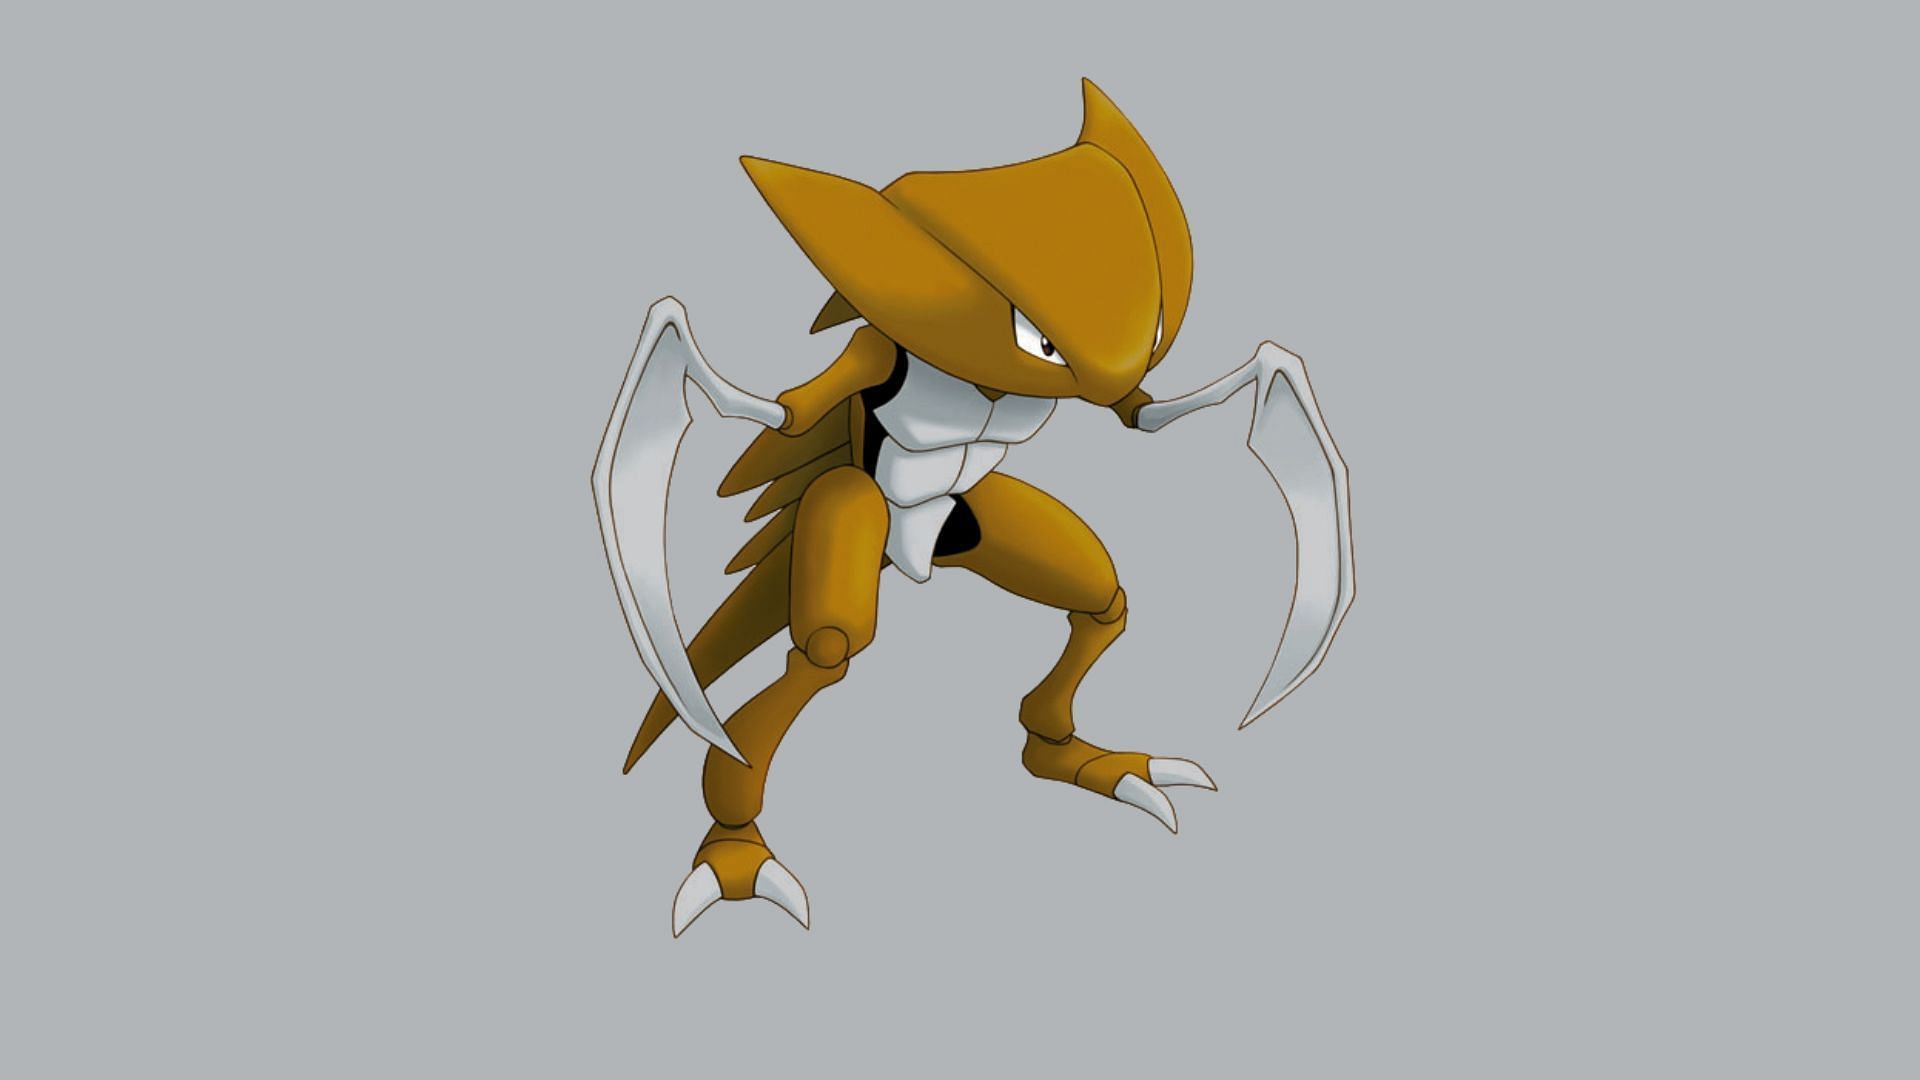 Kabutops&#039;s weight is 40.5 kg (89.3 lbs) (Image via The Pokemon Company)